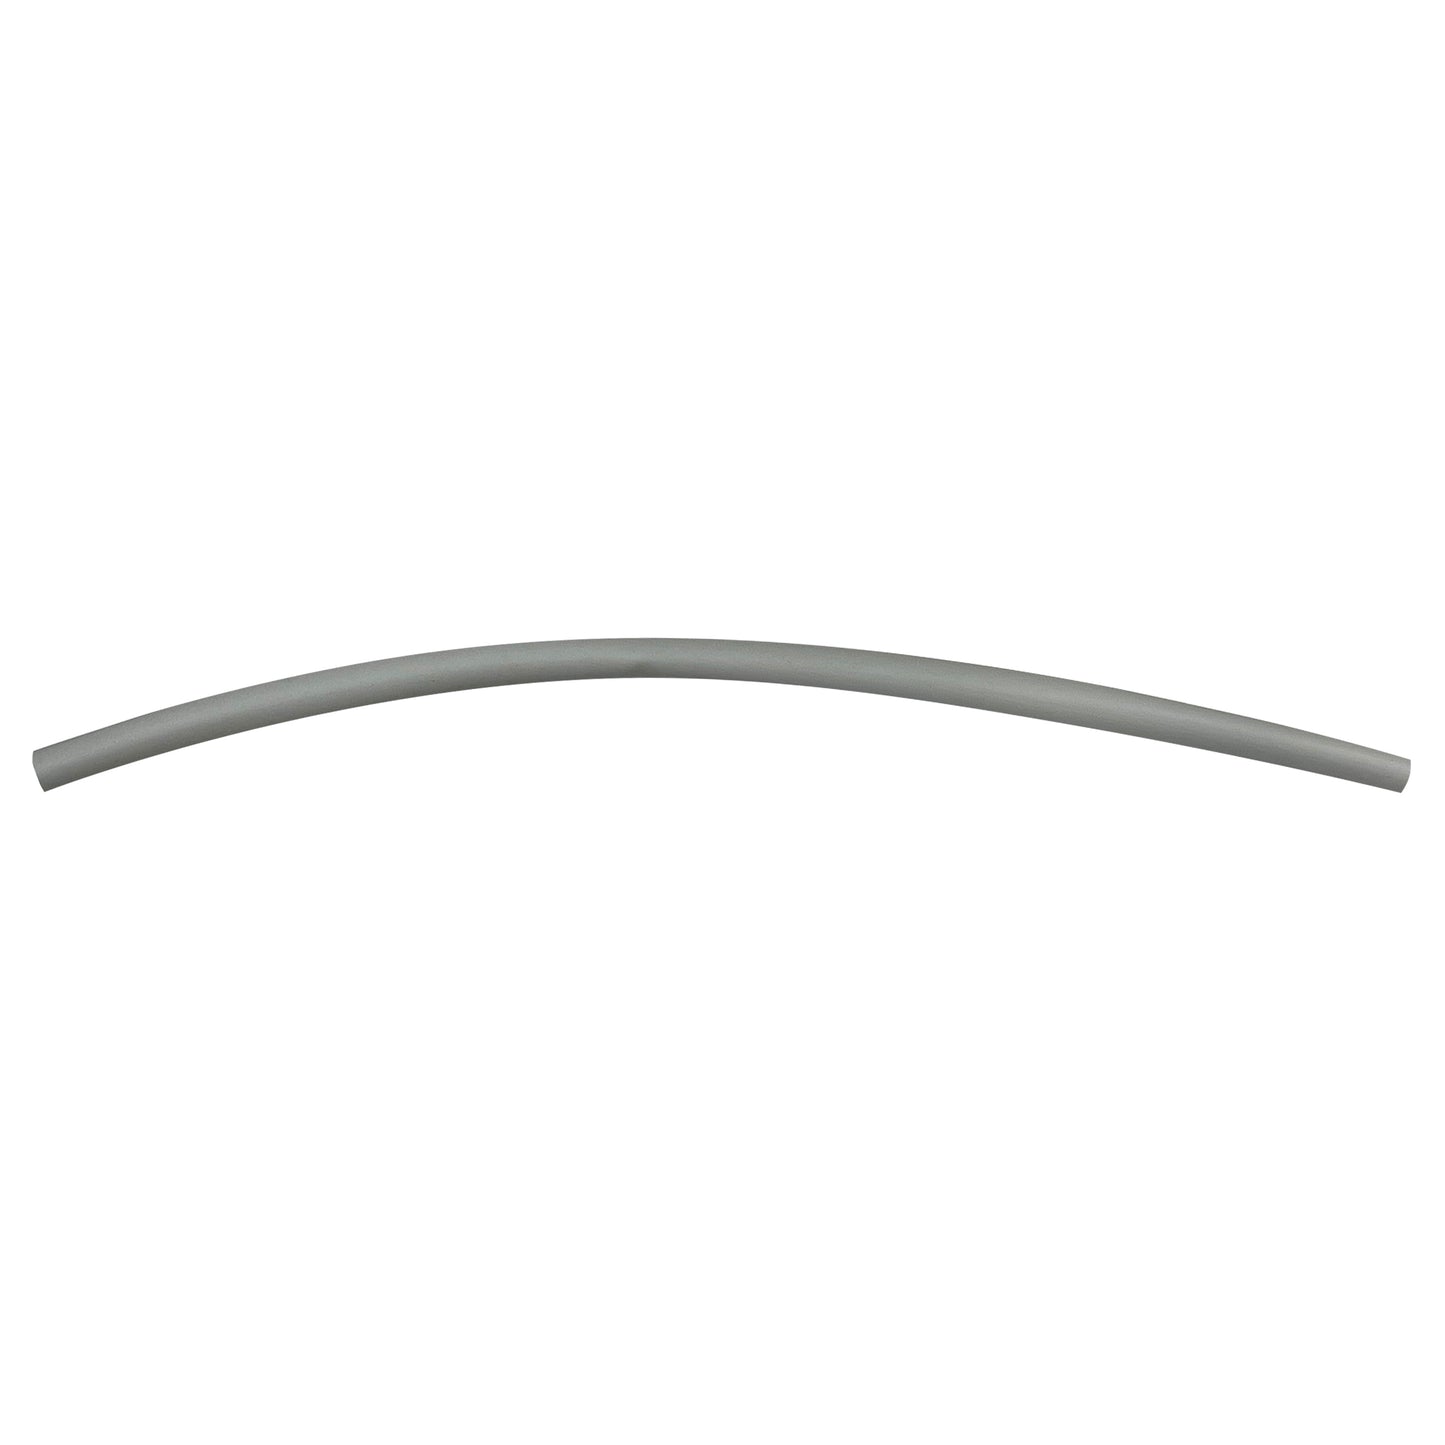 Flexible Thin Single Wall Non-Adhesive Heat Shrink Tubing 2:1 White 3/16" ID - 12" Inch 10 Pack